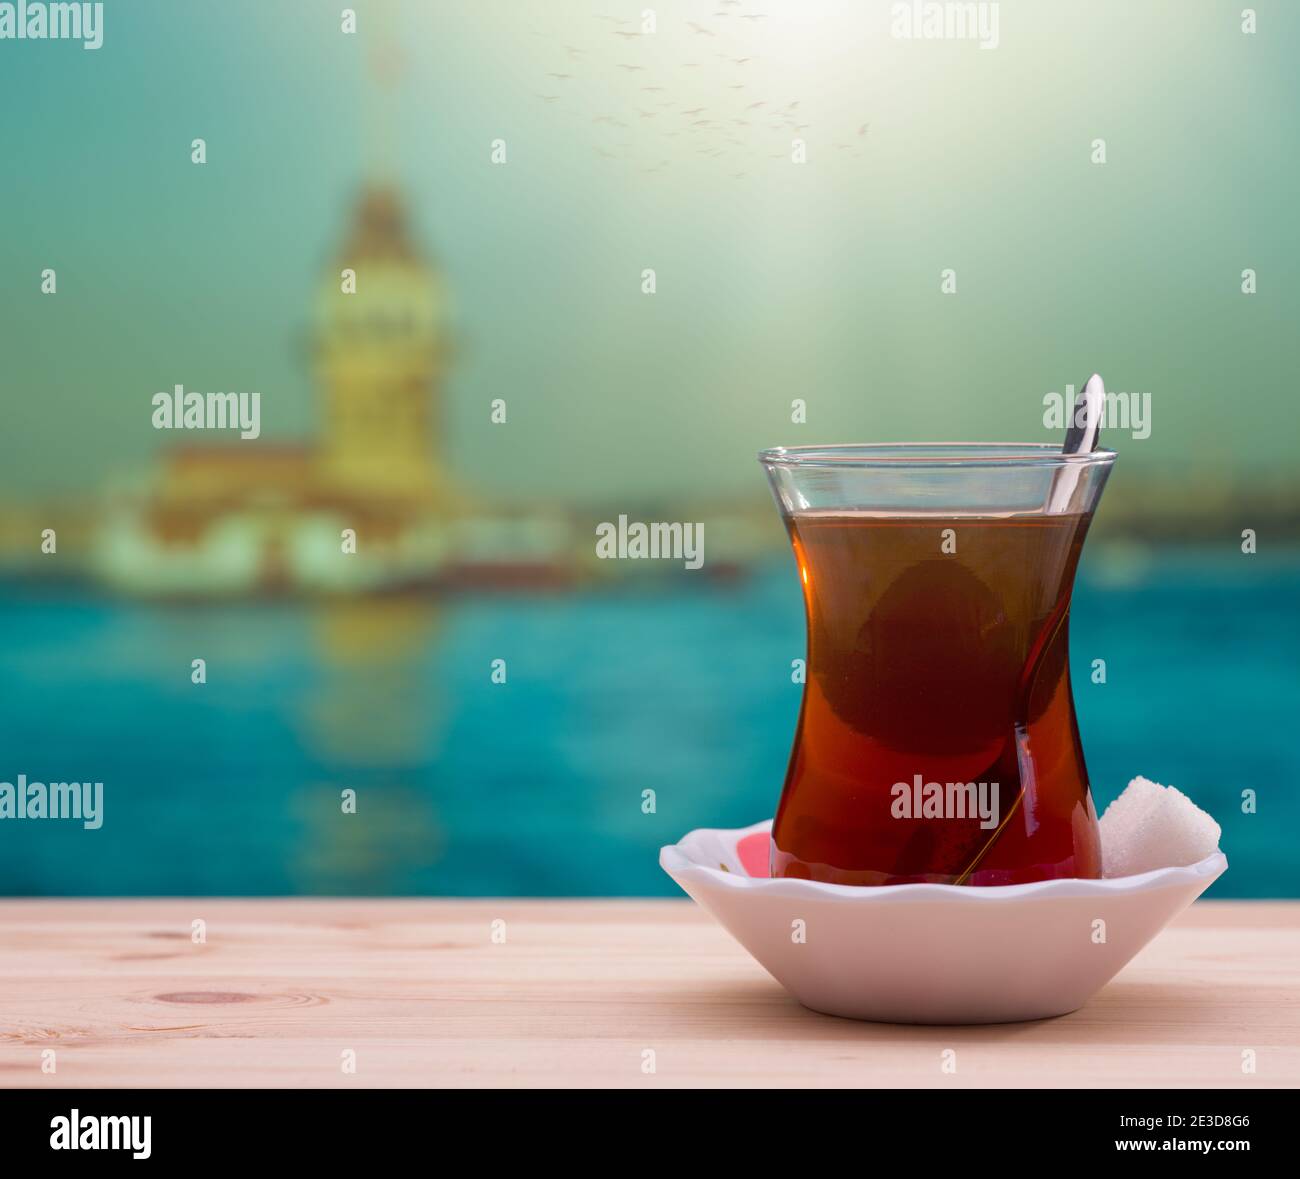 Turkish Tea on the table. Maiden's Tower in the background Stock Photo